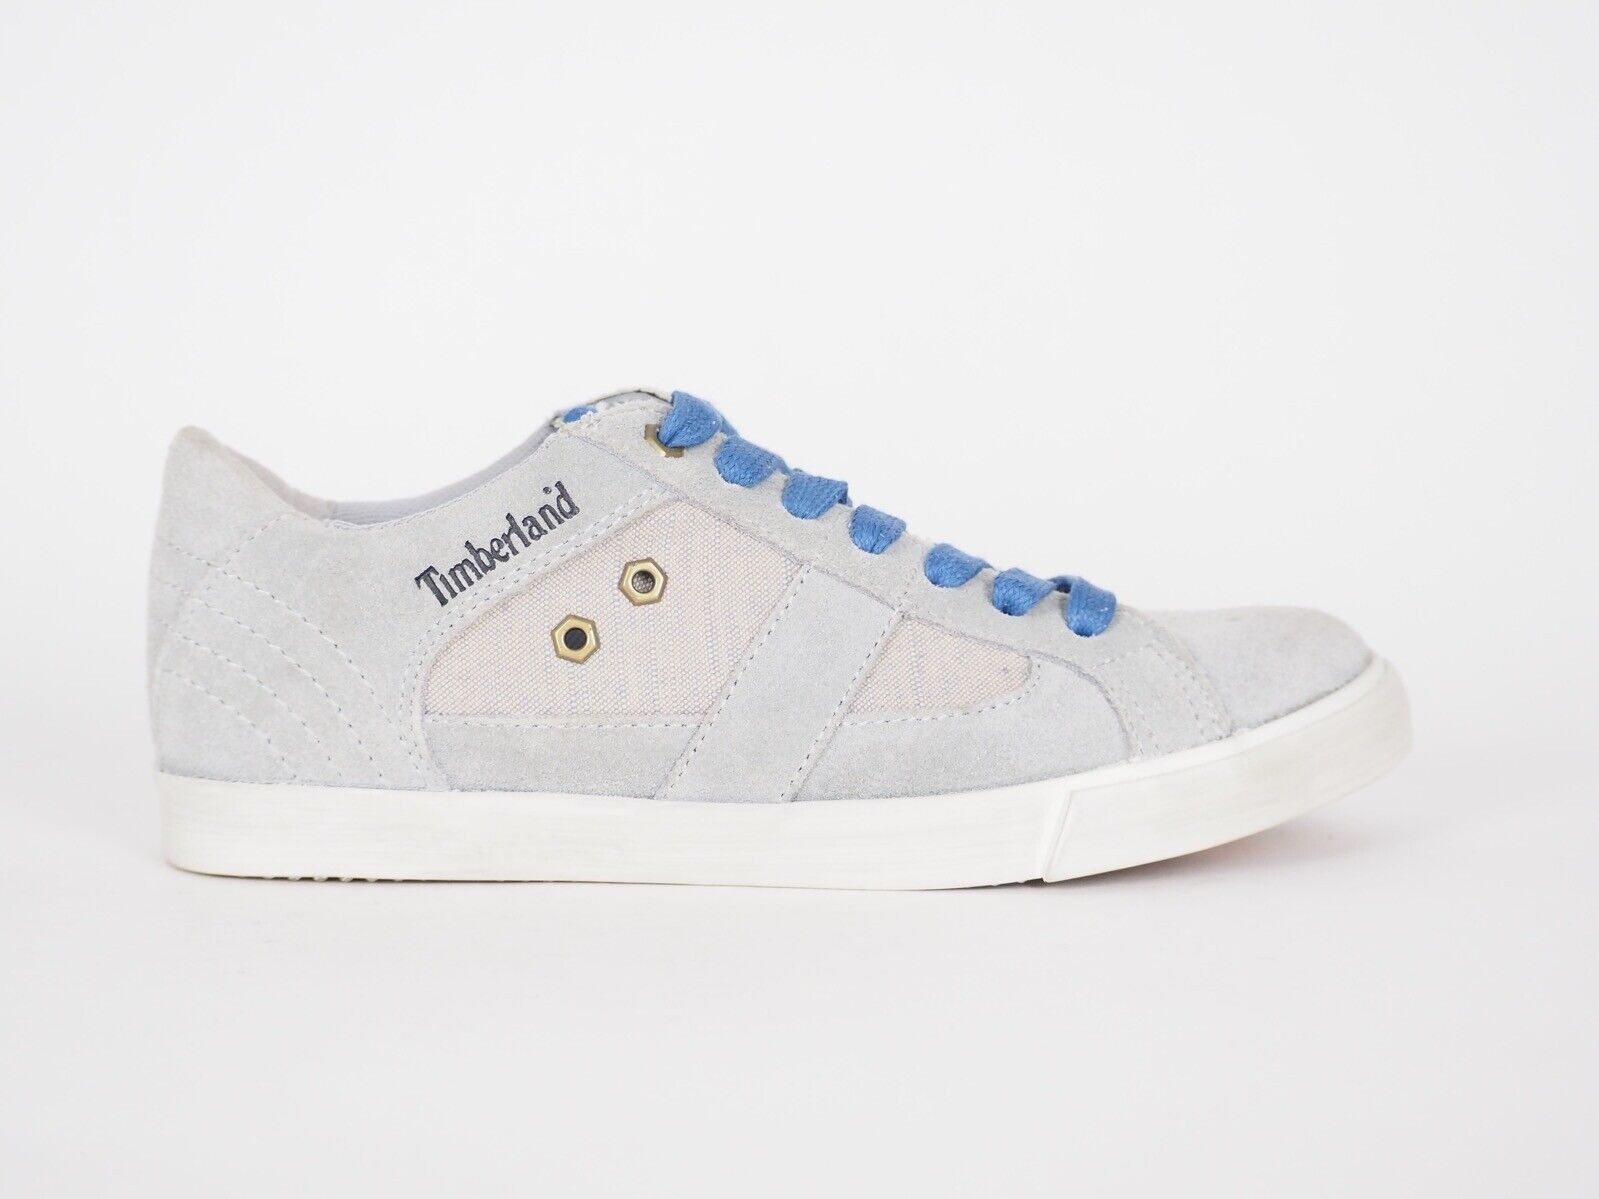 Womens Timberland EK Glastonbury 8234B Blue Suede Fabric Lace Up Trainers UK 5 - London Top Style